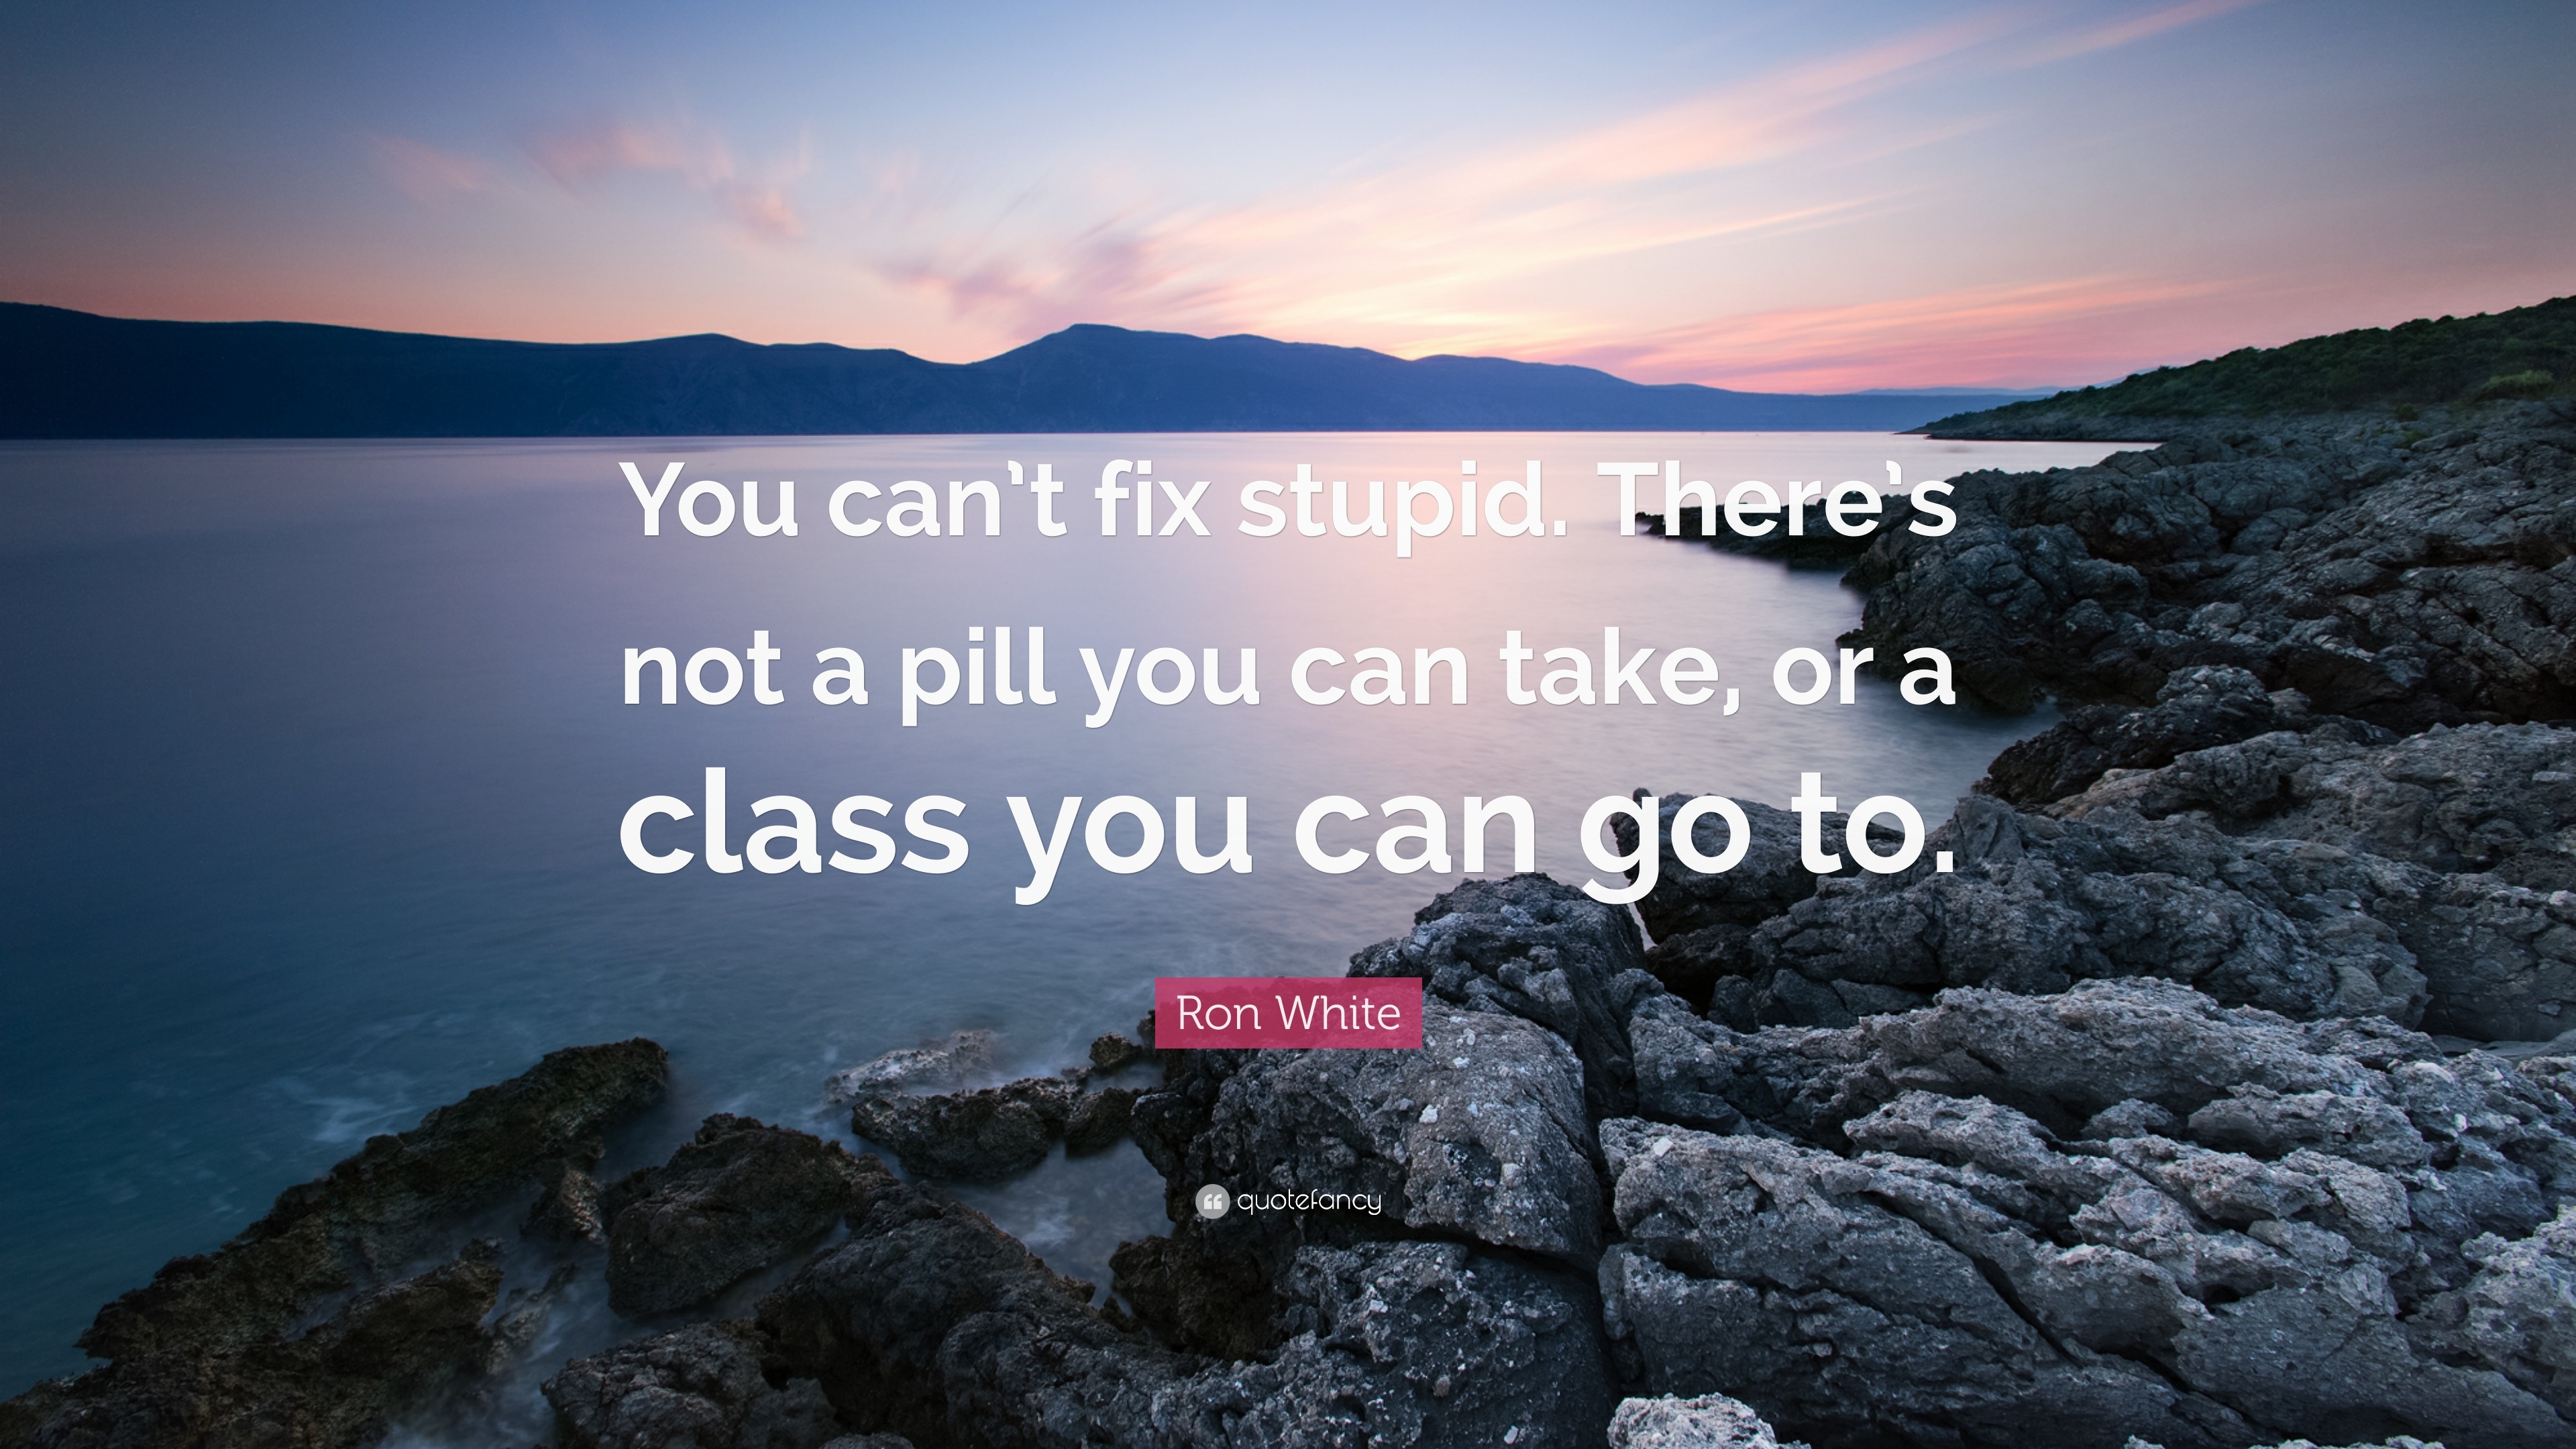 Ron White Quote You Can T Fix Stupid There S Not A Pill You Can Take Or